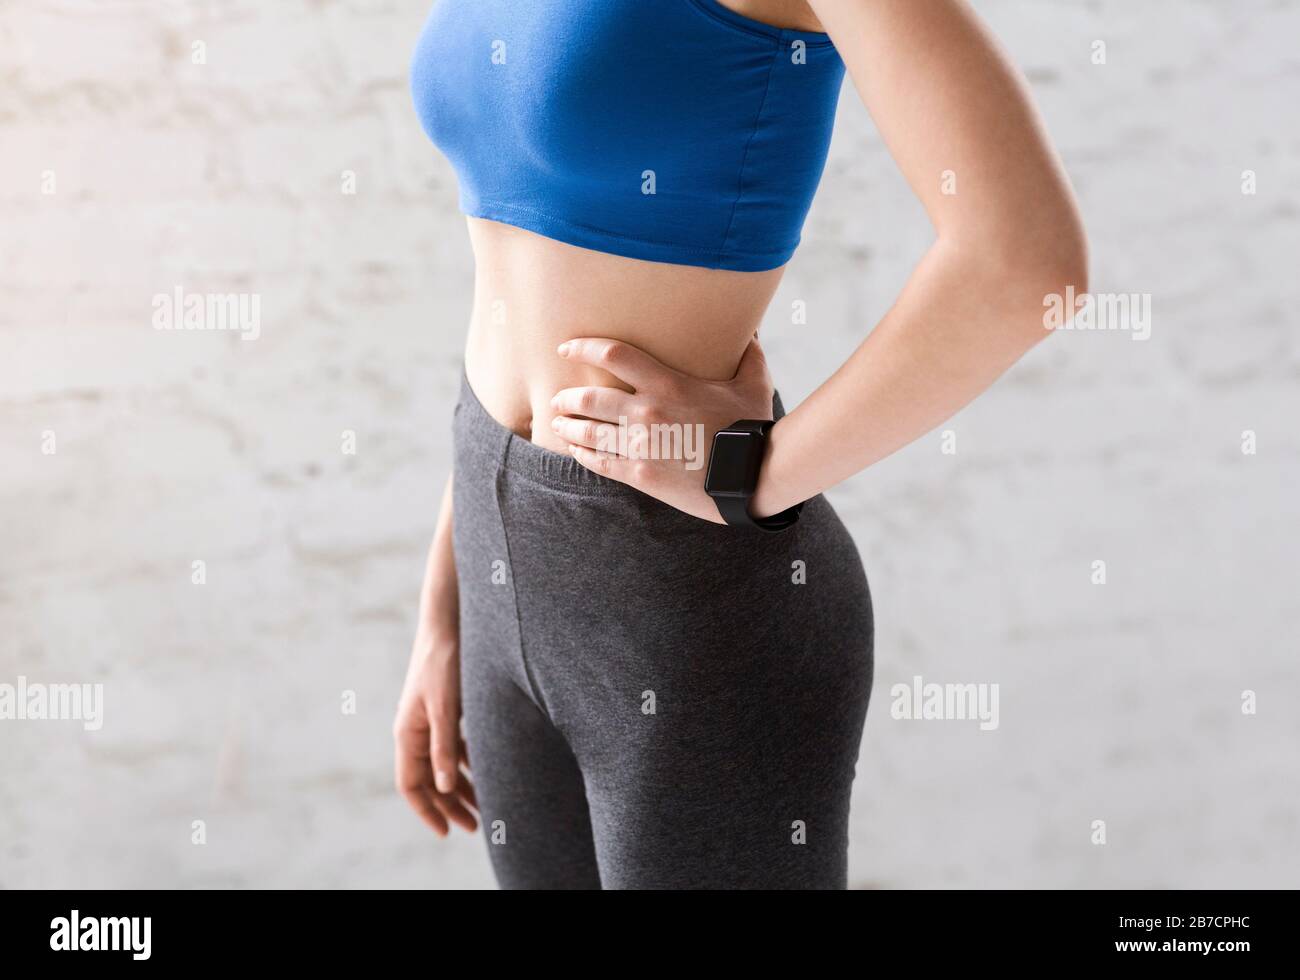 Flat Belly Stock Photos - 41,106 Images